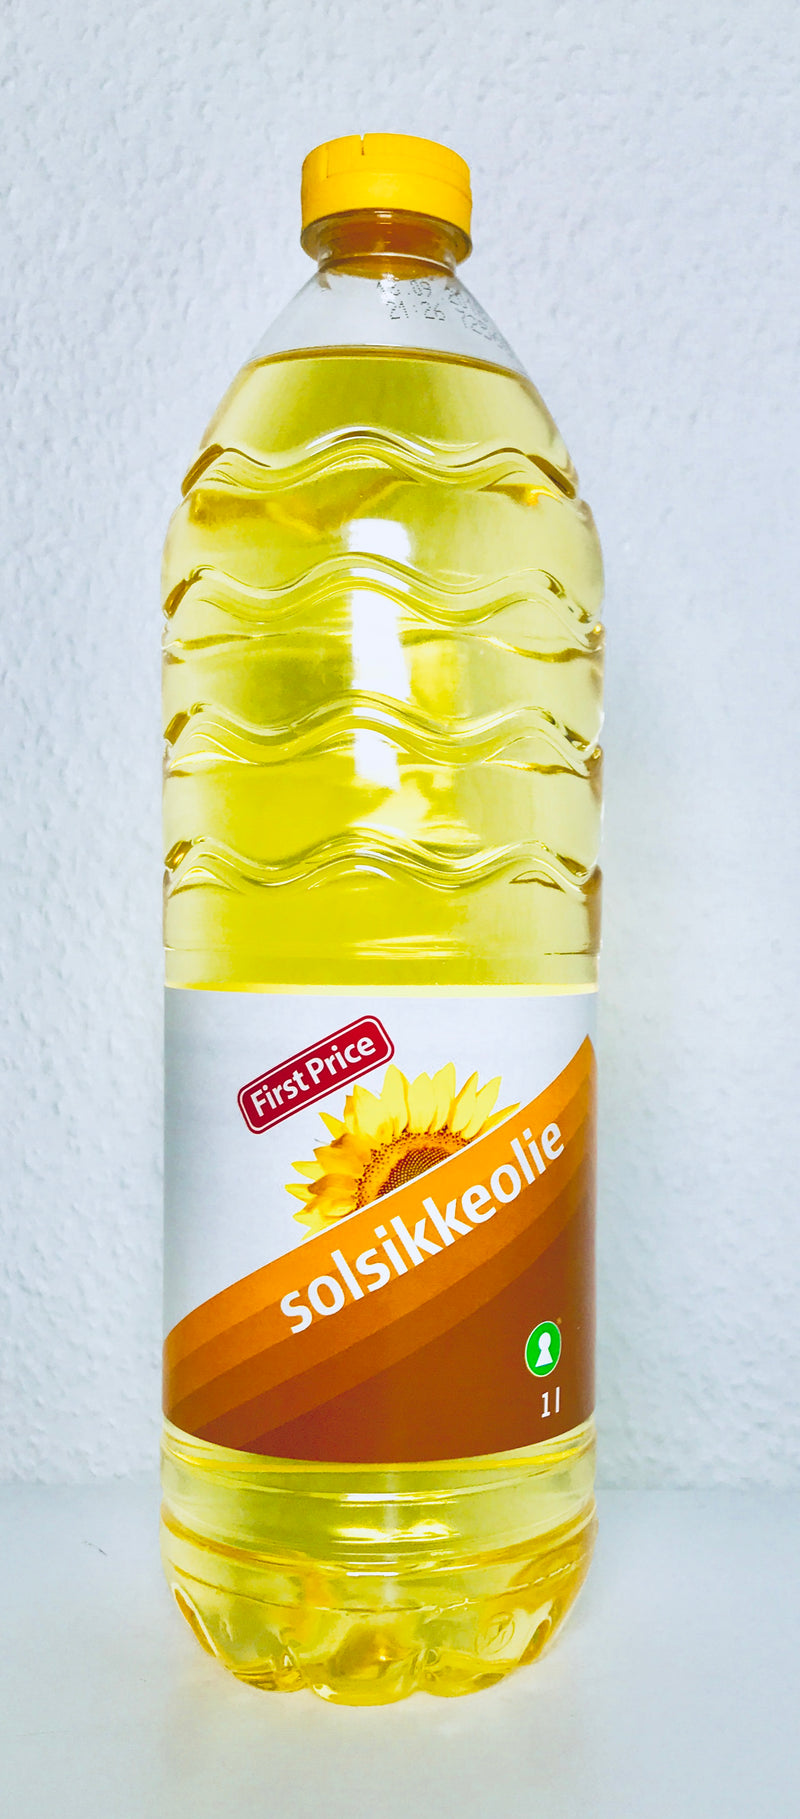 Solsikkeolie 1L - First Price